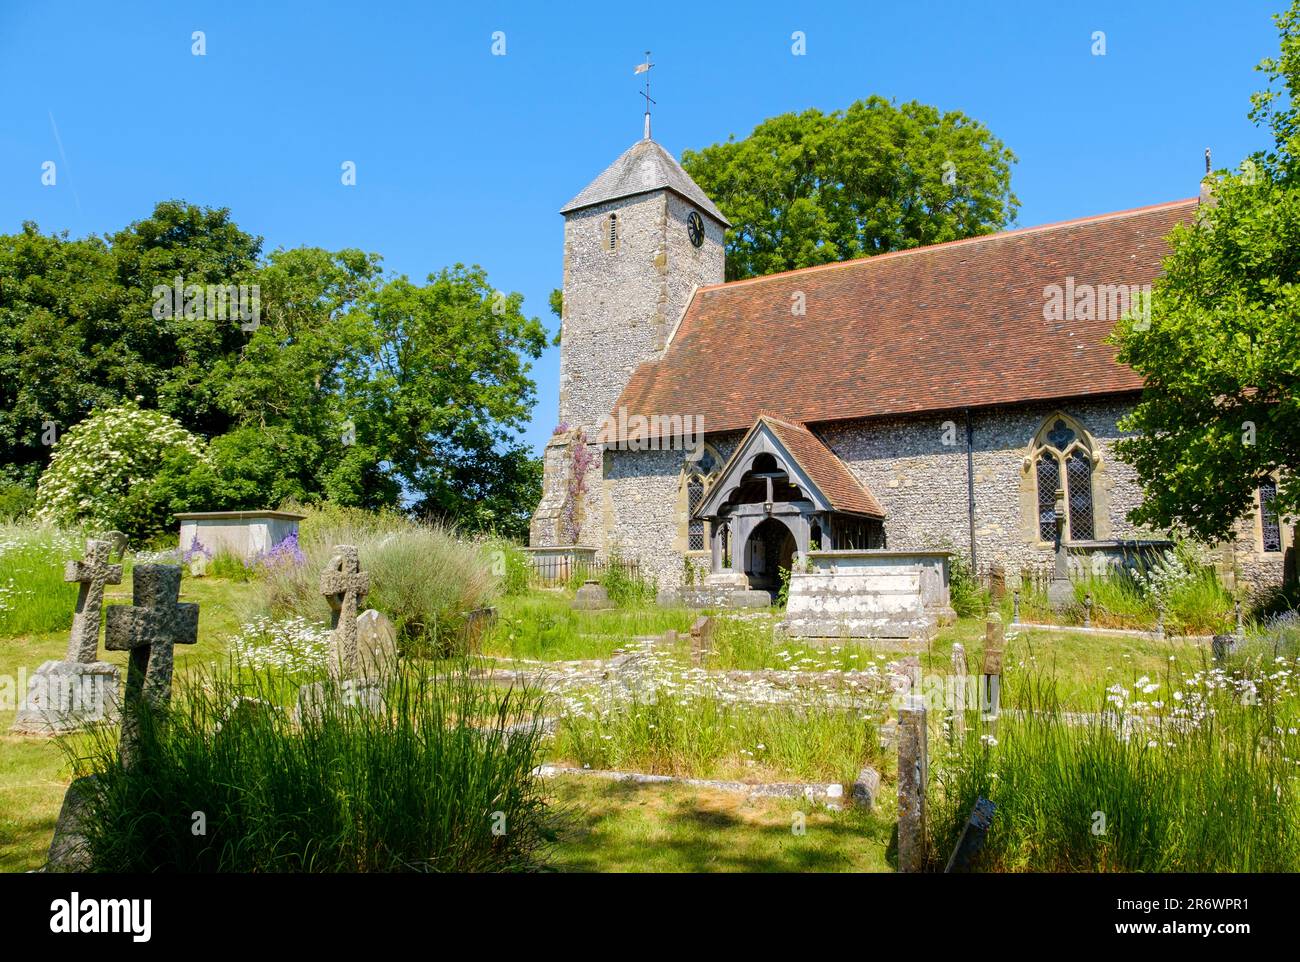 St Pancras Church, Kingston, South Downs, East Sussex, Regno Unito Foto Stock